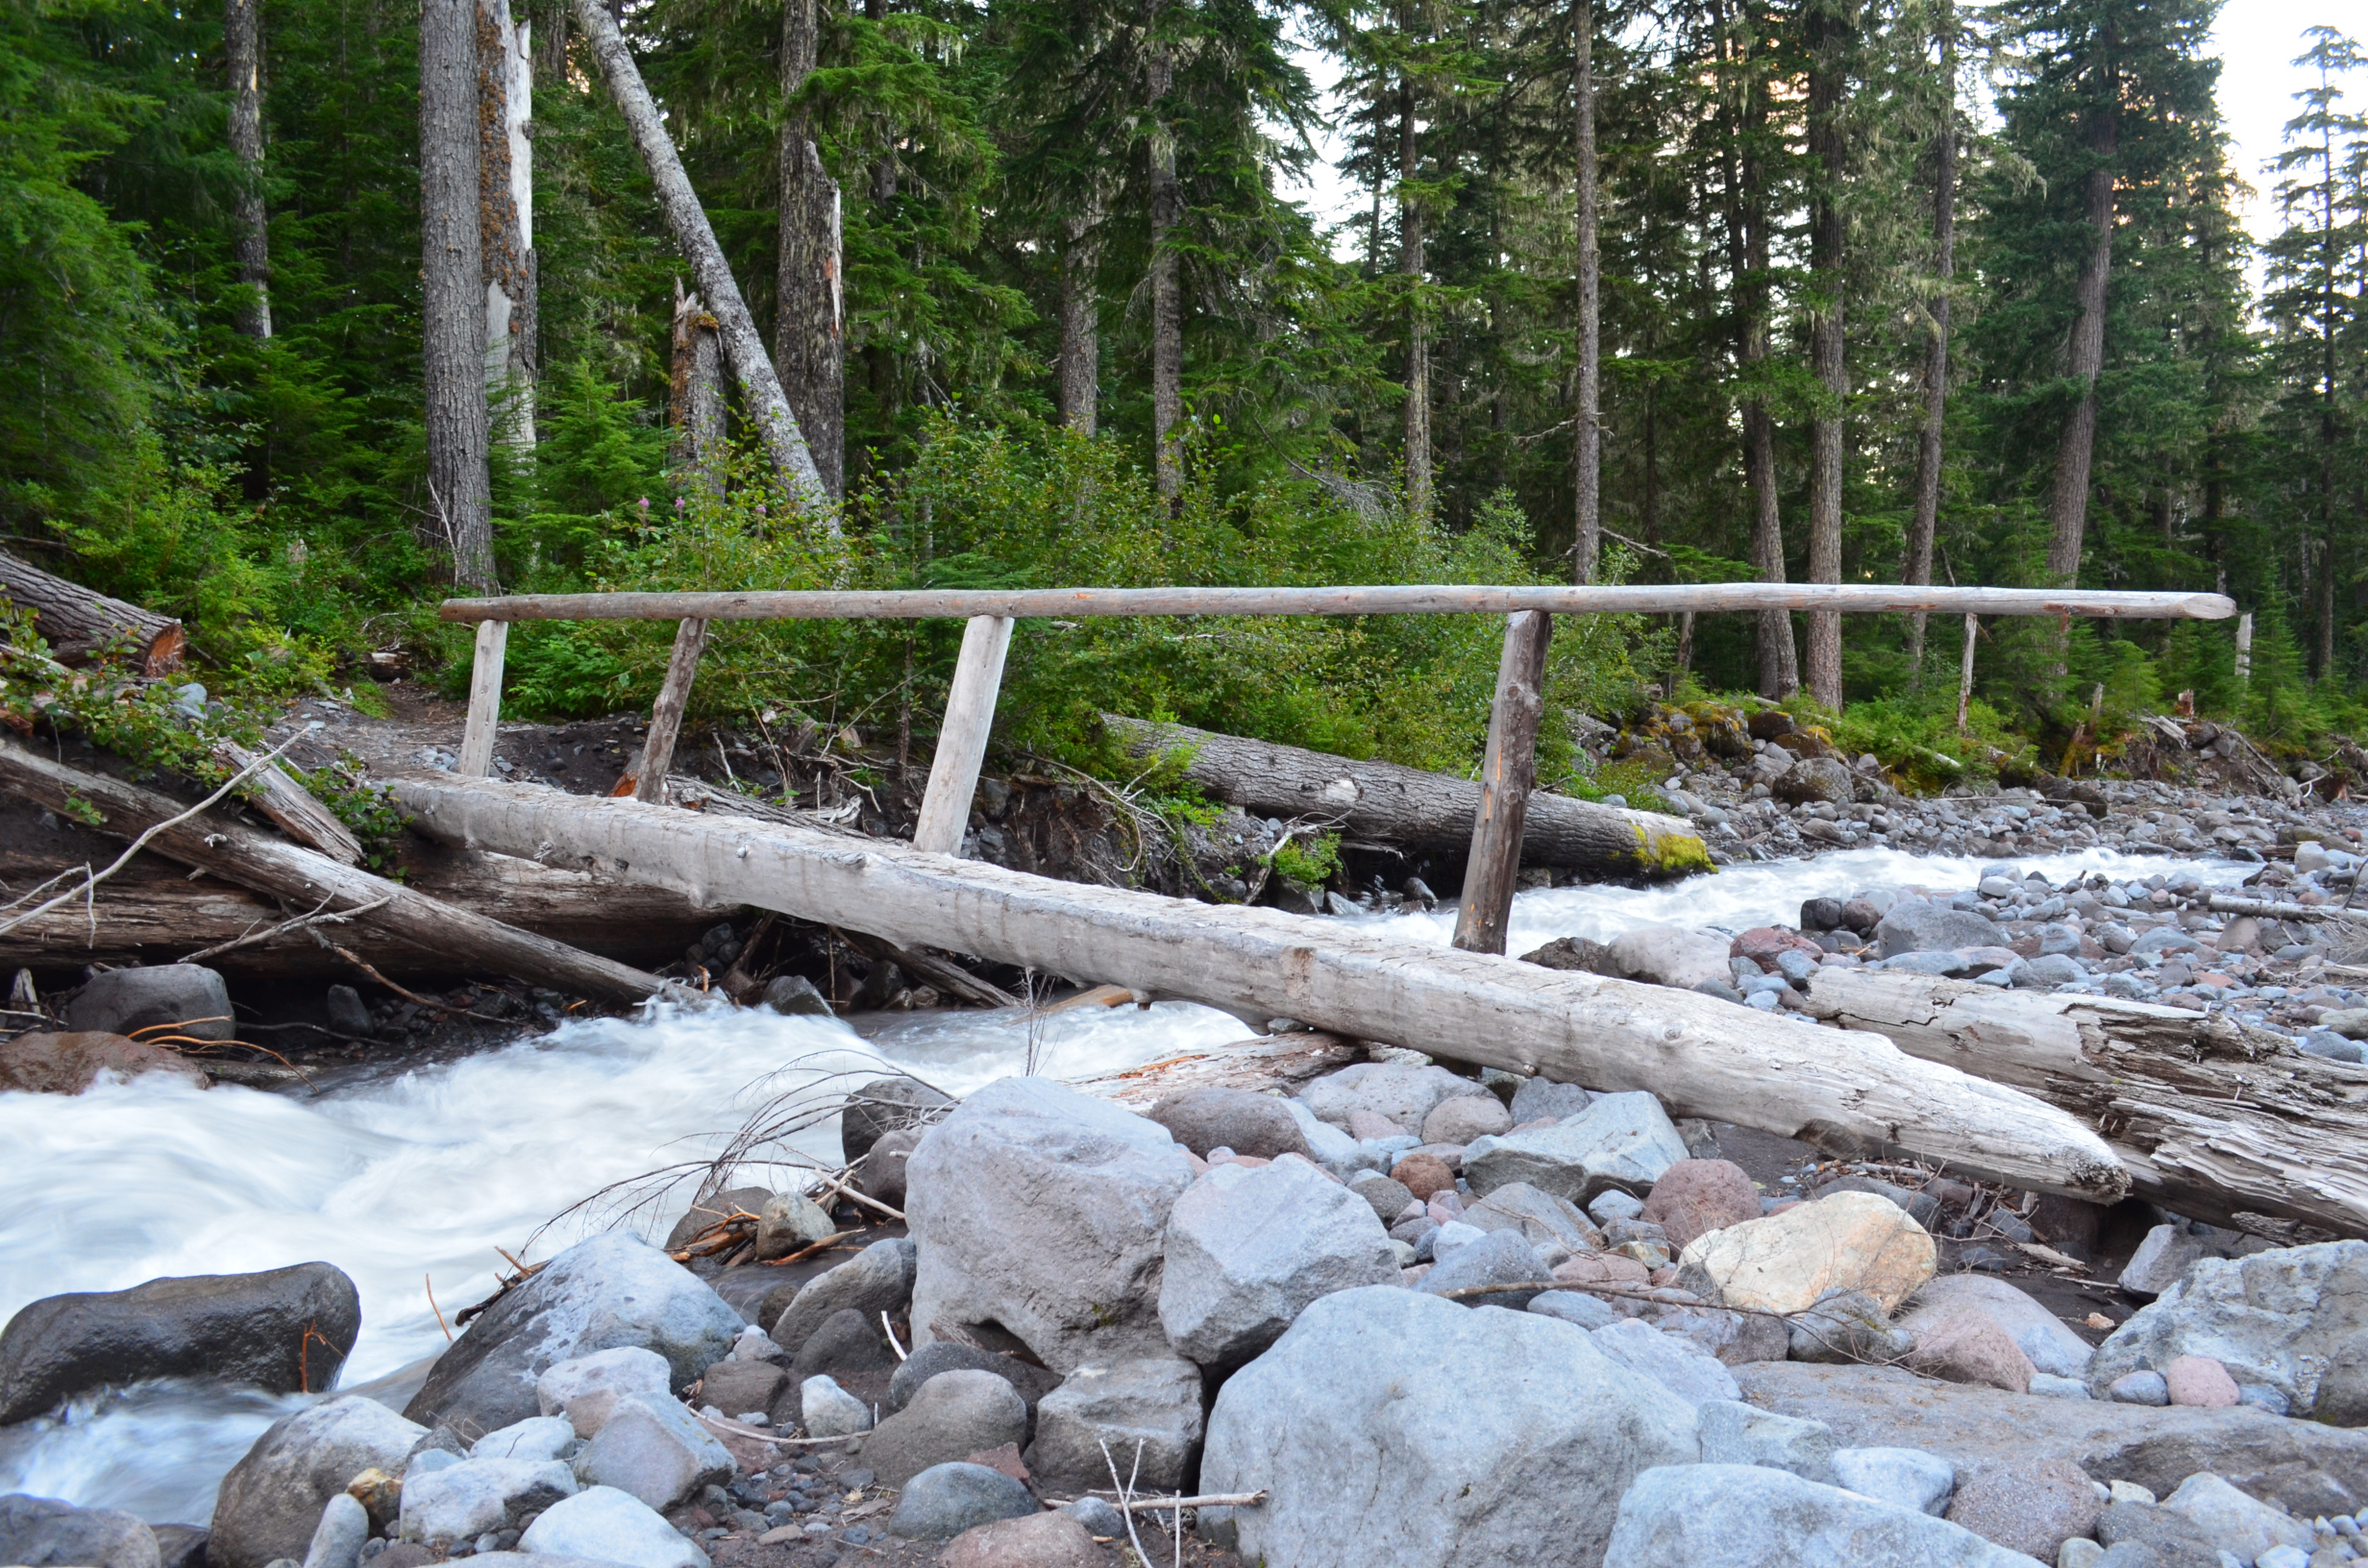 A log-over-river with a railing stype foot bridge.